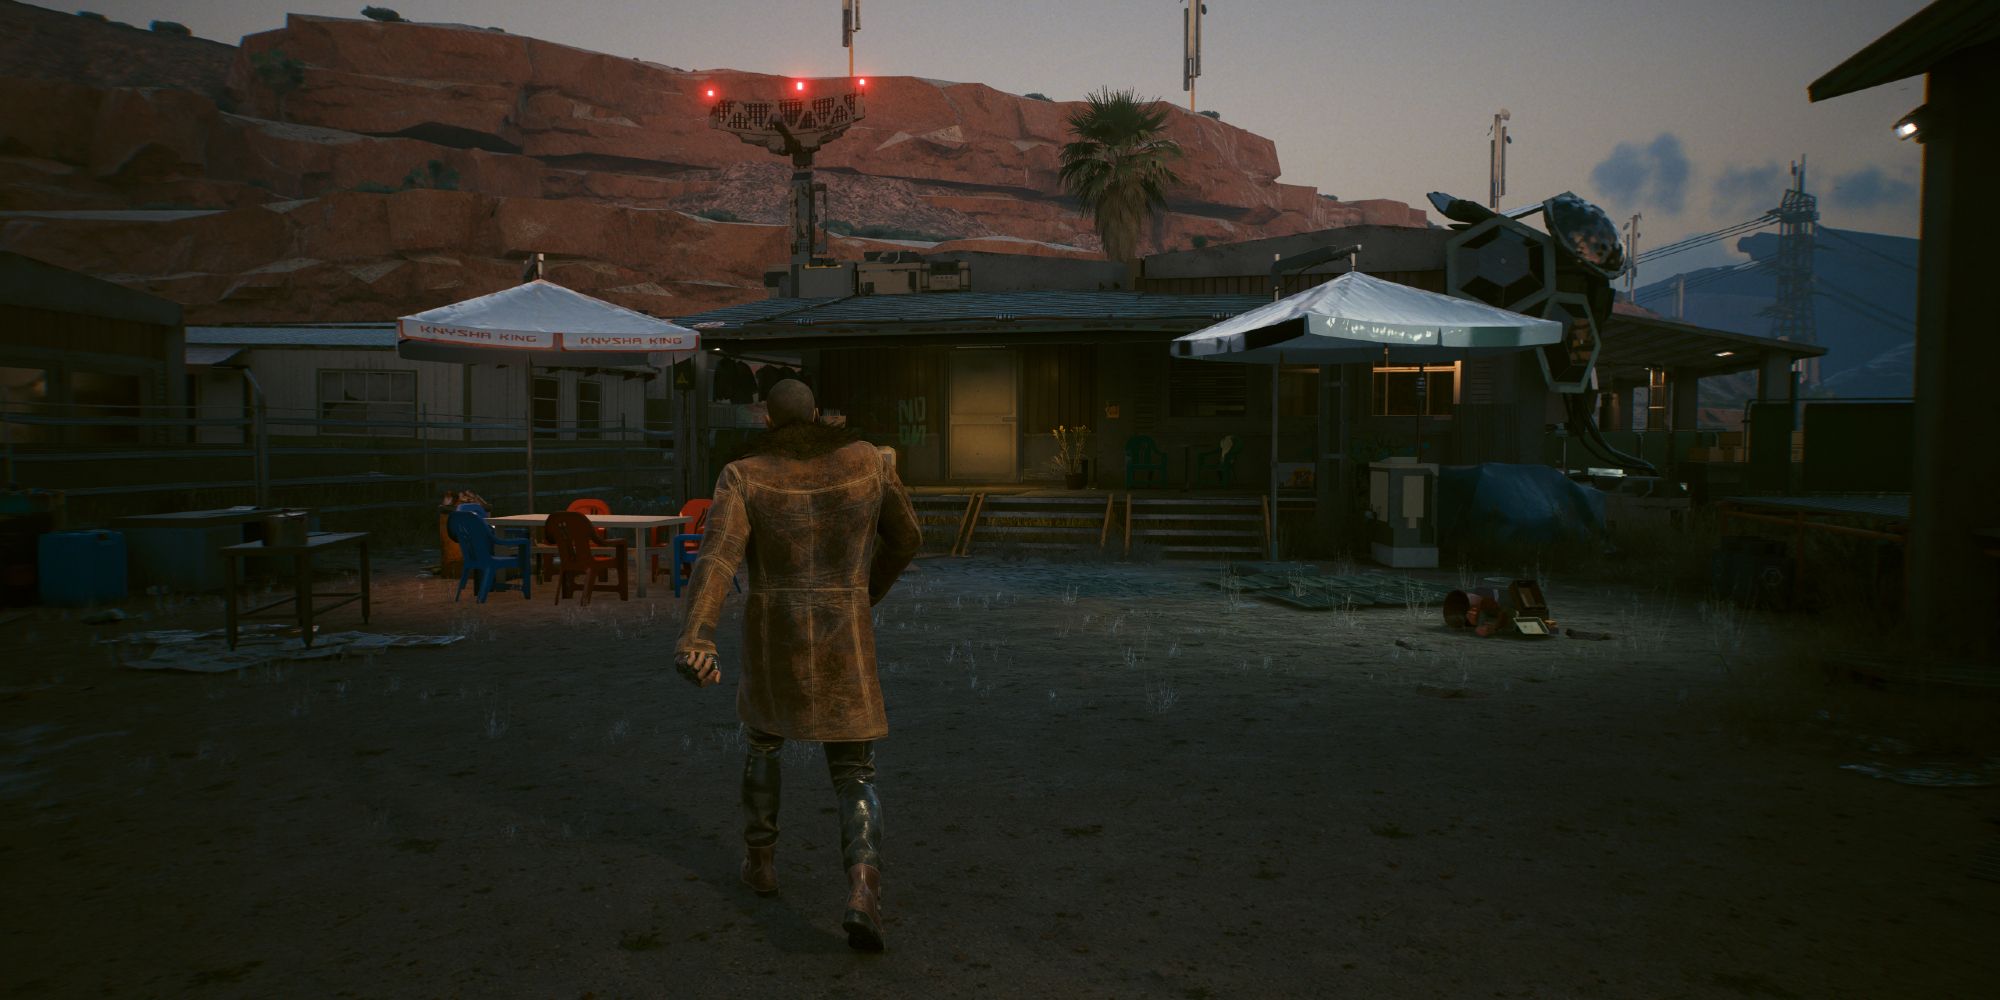 River Ward walking to his sister's house in Cyberpunk 2077.